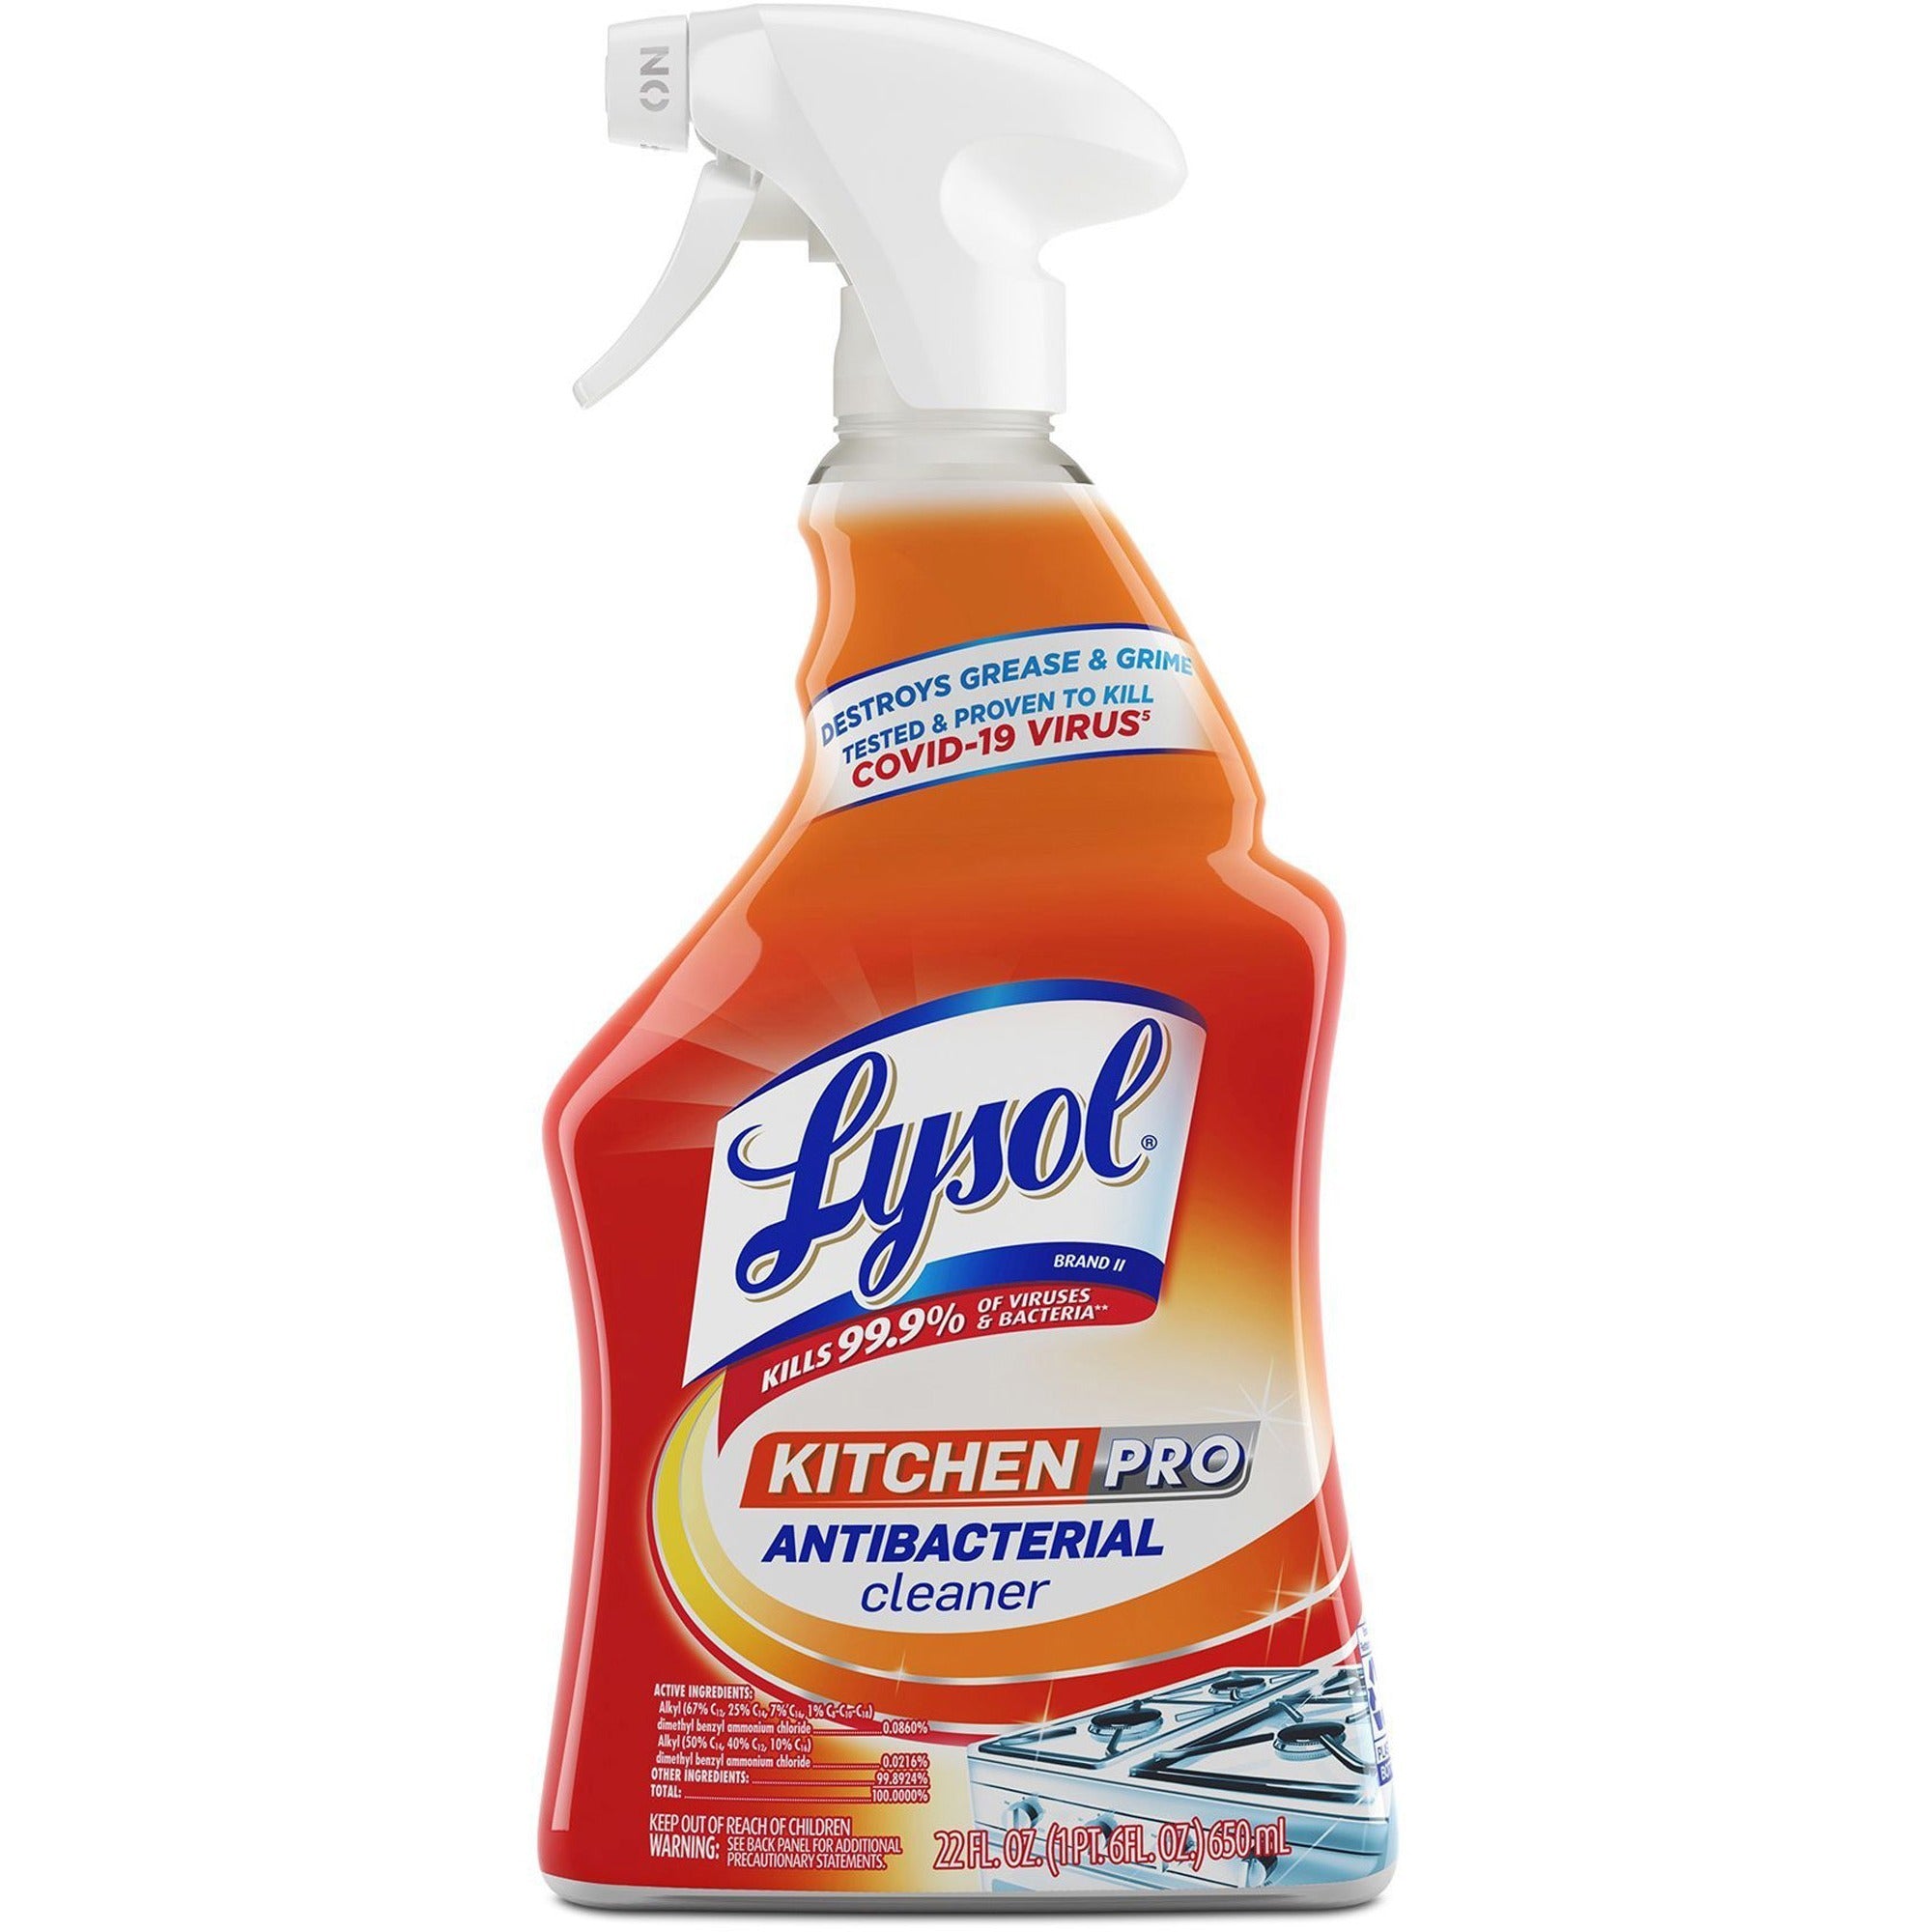 lysol-kitchen-pro-antibacterial-cleaner-for-multi-surface-22-fl-oz-07-quart-fresh-citrus-scent-9-carton-deodorize-streak-free-chemical-free-disinfectant-anti-bacterial-residue-free-clear_rac79556ct - 2